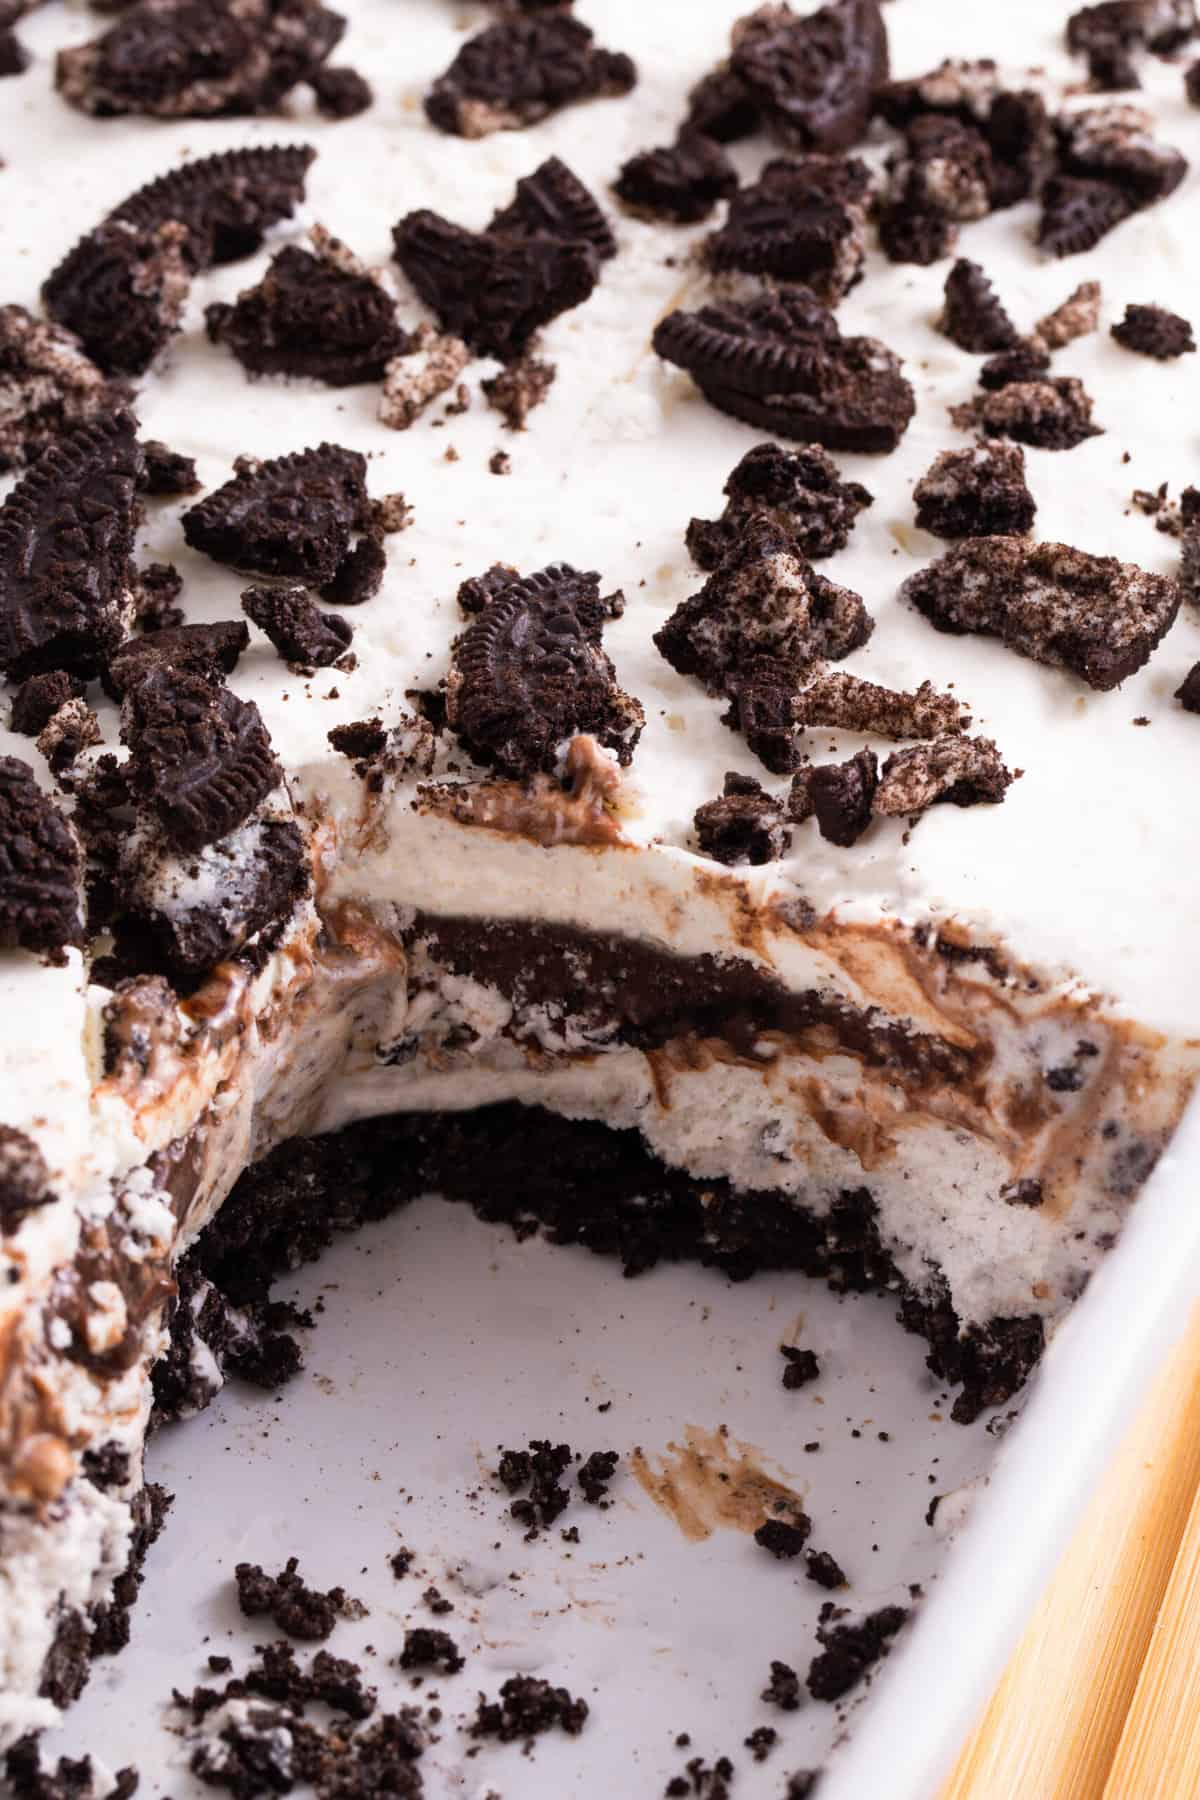 close up image of a slice taken out of the oreo ice cream cake 9x13 baking dish to show the cross section layers